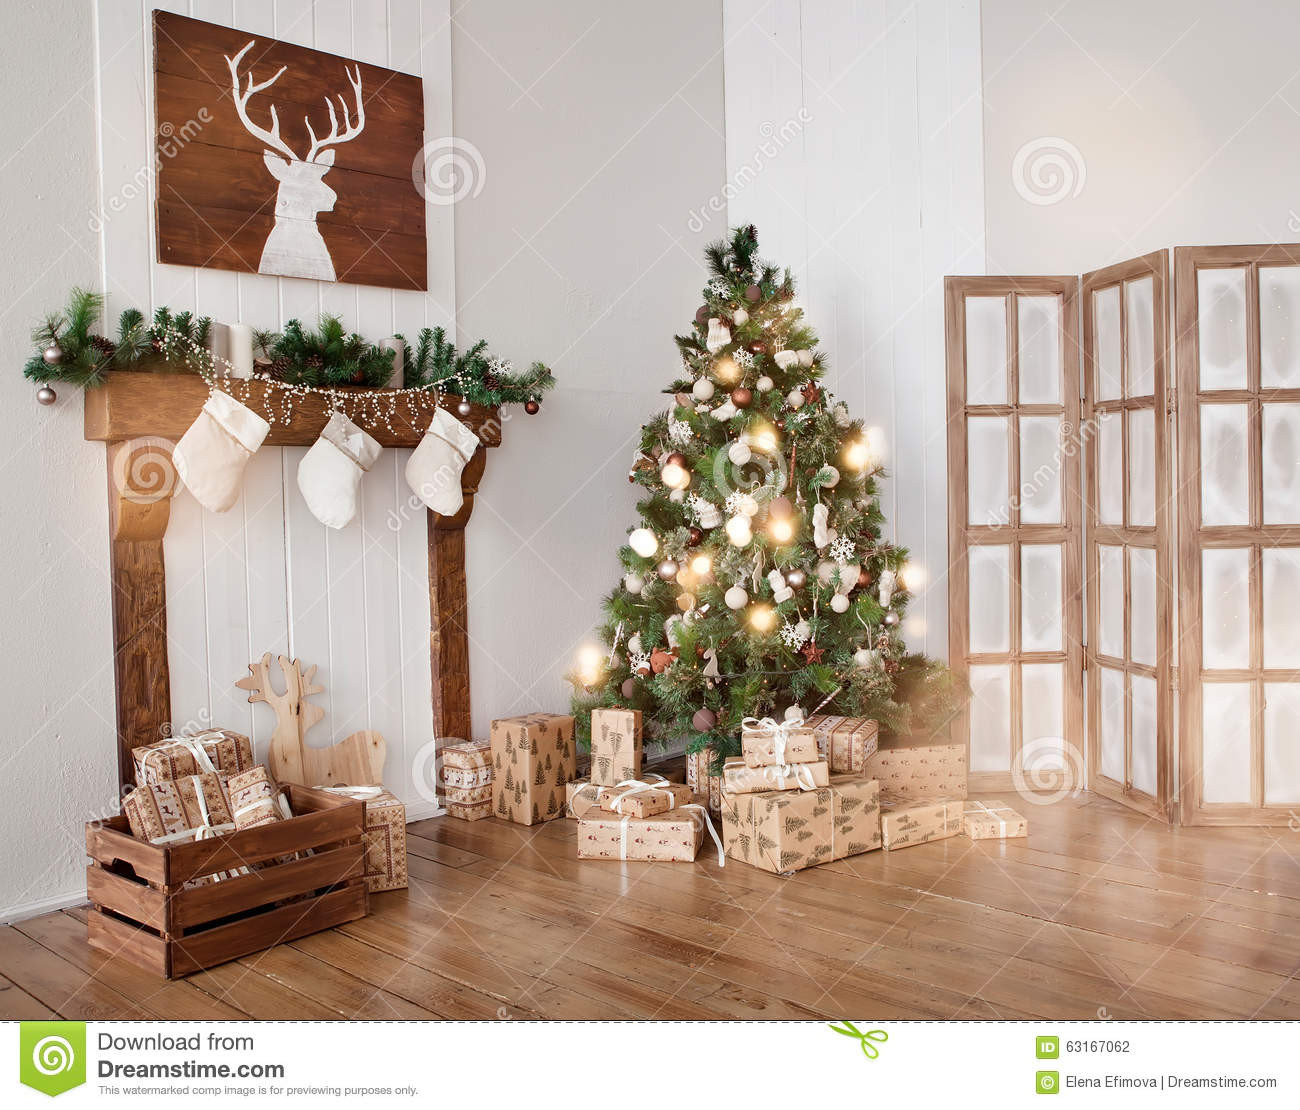 Living Room Tree Decoration
 Interior Living Room With A Christmas Tree And Gifts